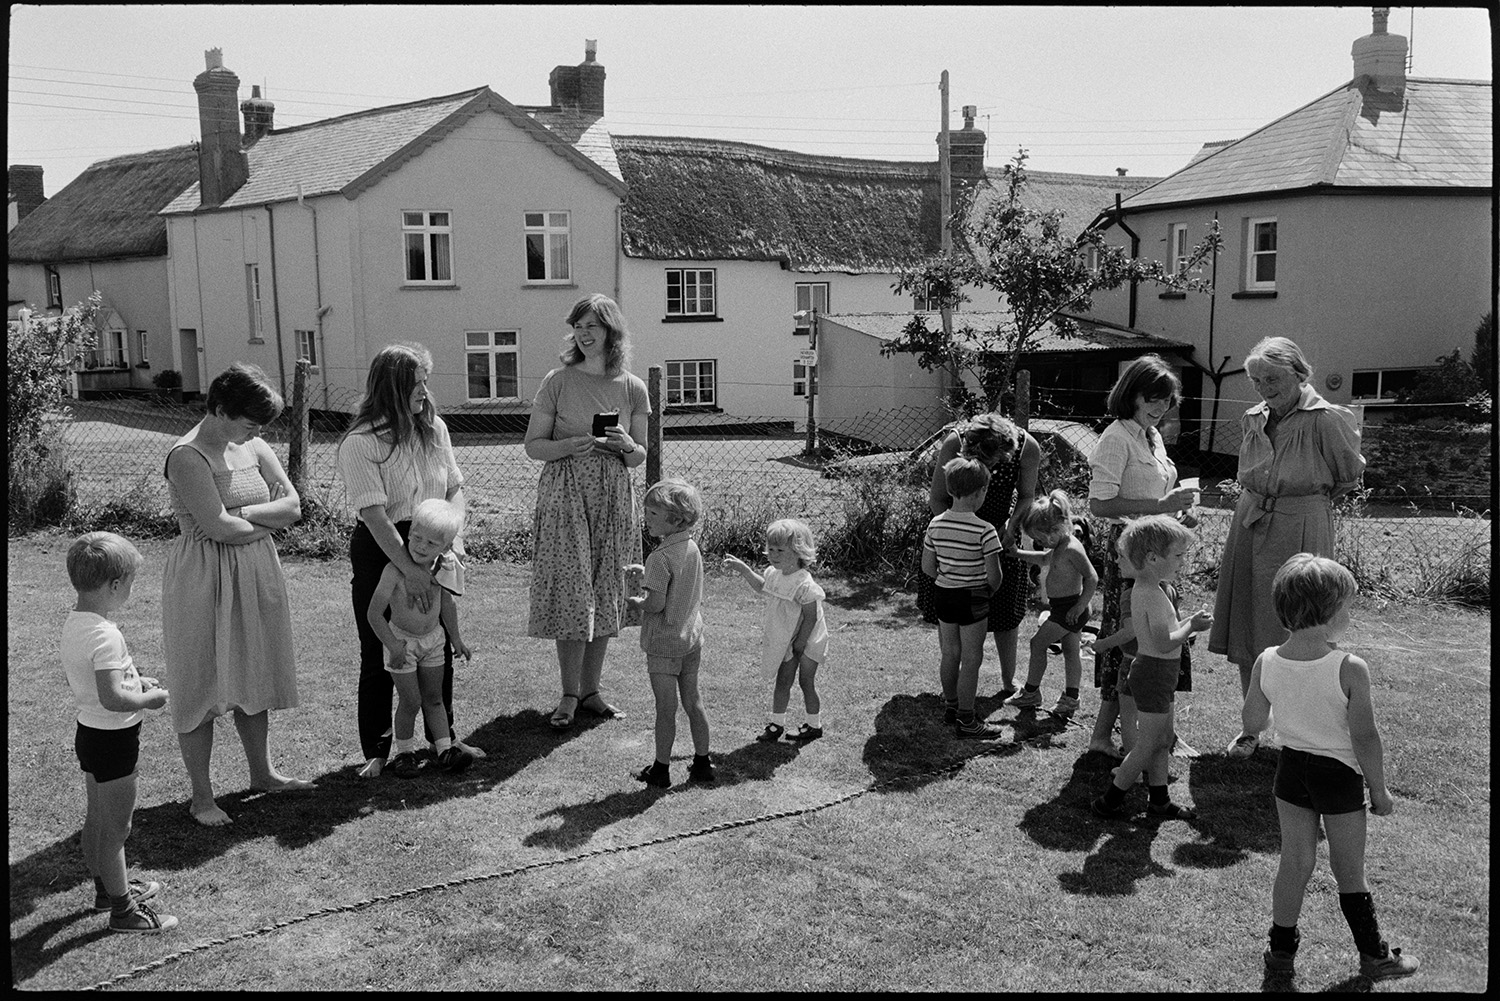 Sports day, children's races, parents egg and spoon, mothers women chatting, refreshments.
[Catherine Simmons, stood in the centre and possibly holding a wallet, talking with five other women and nine children at the start of an event at Dolton Sports Day. Thatched houses are visible in the background.]